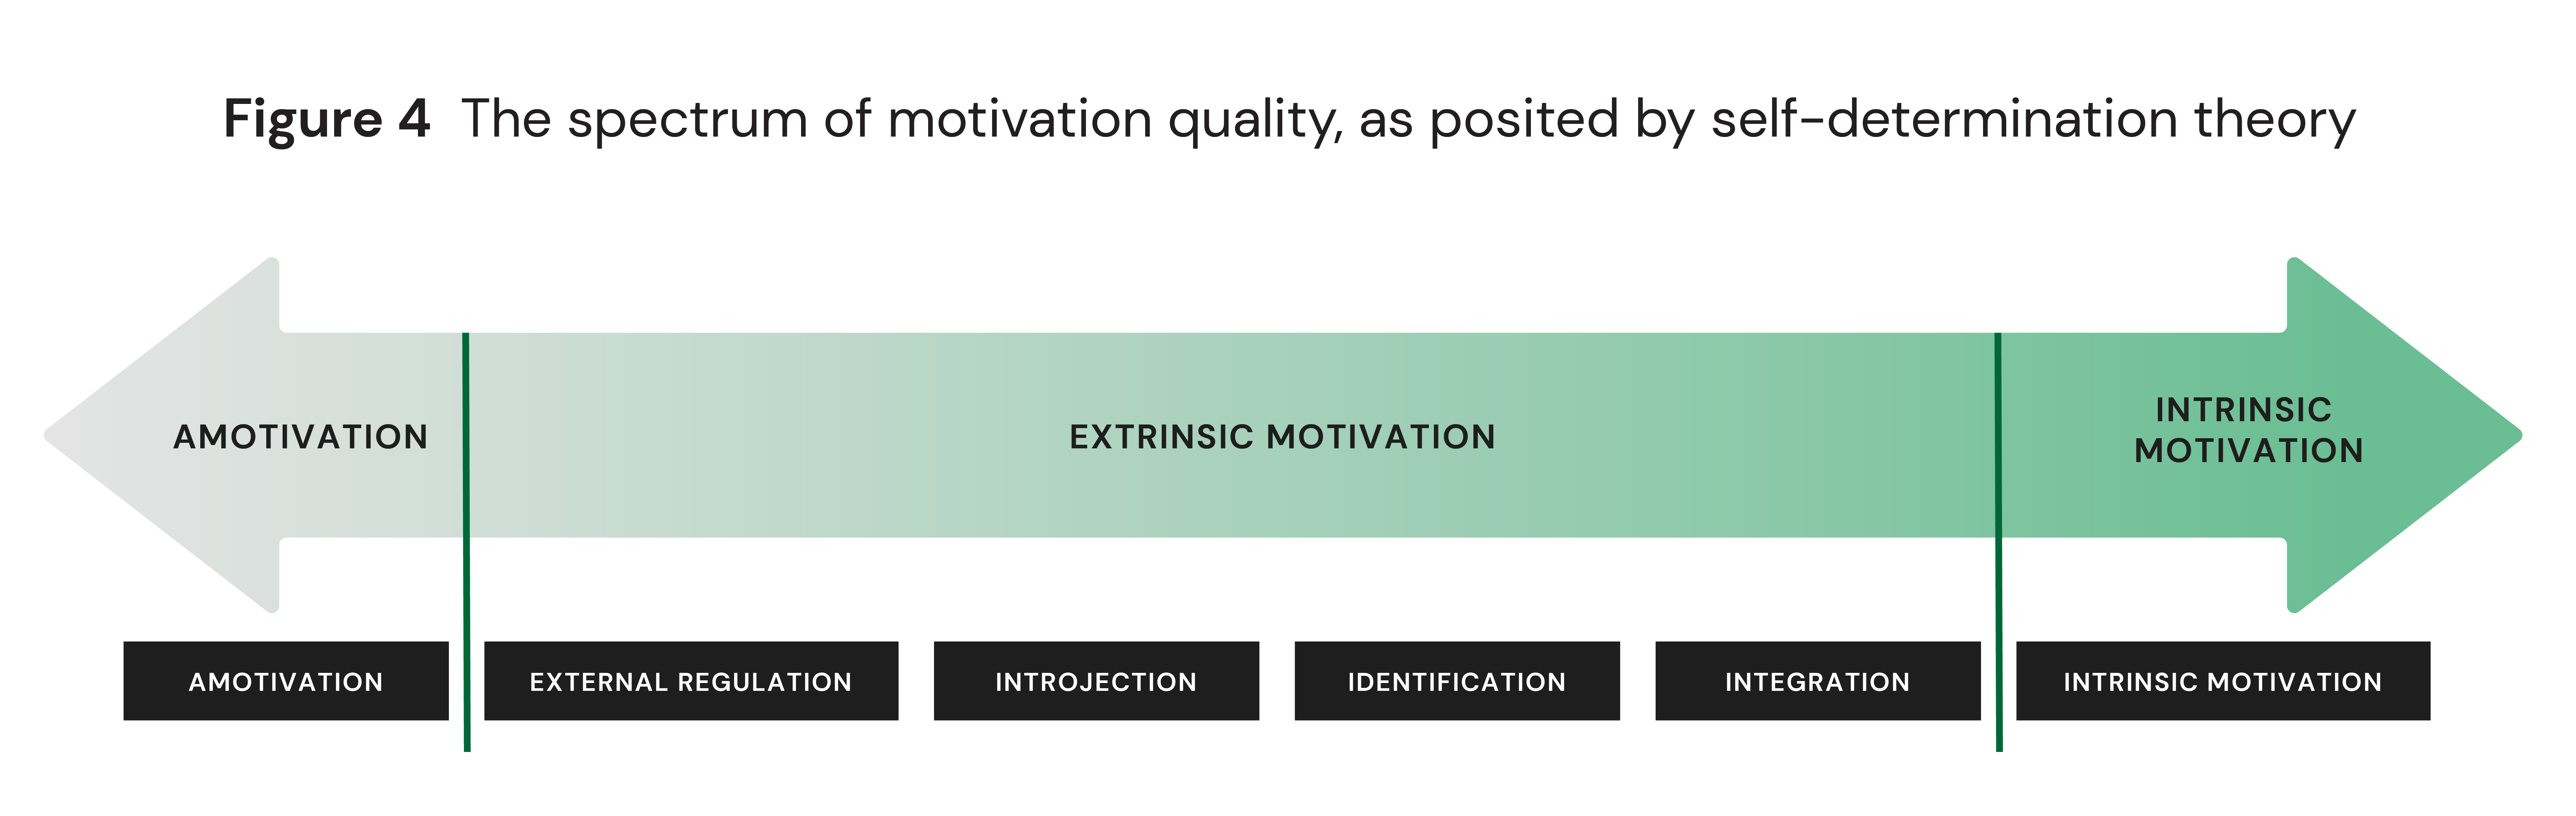 The spectrum of motivation quality, as posited by self-determination theory